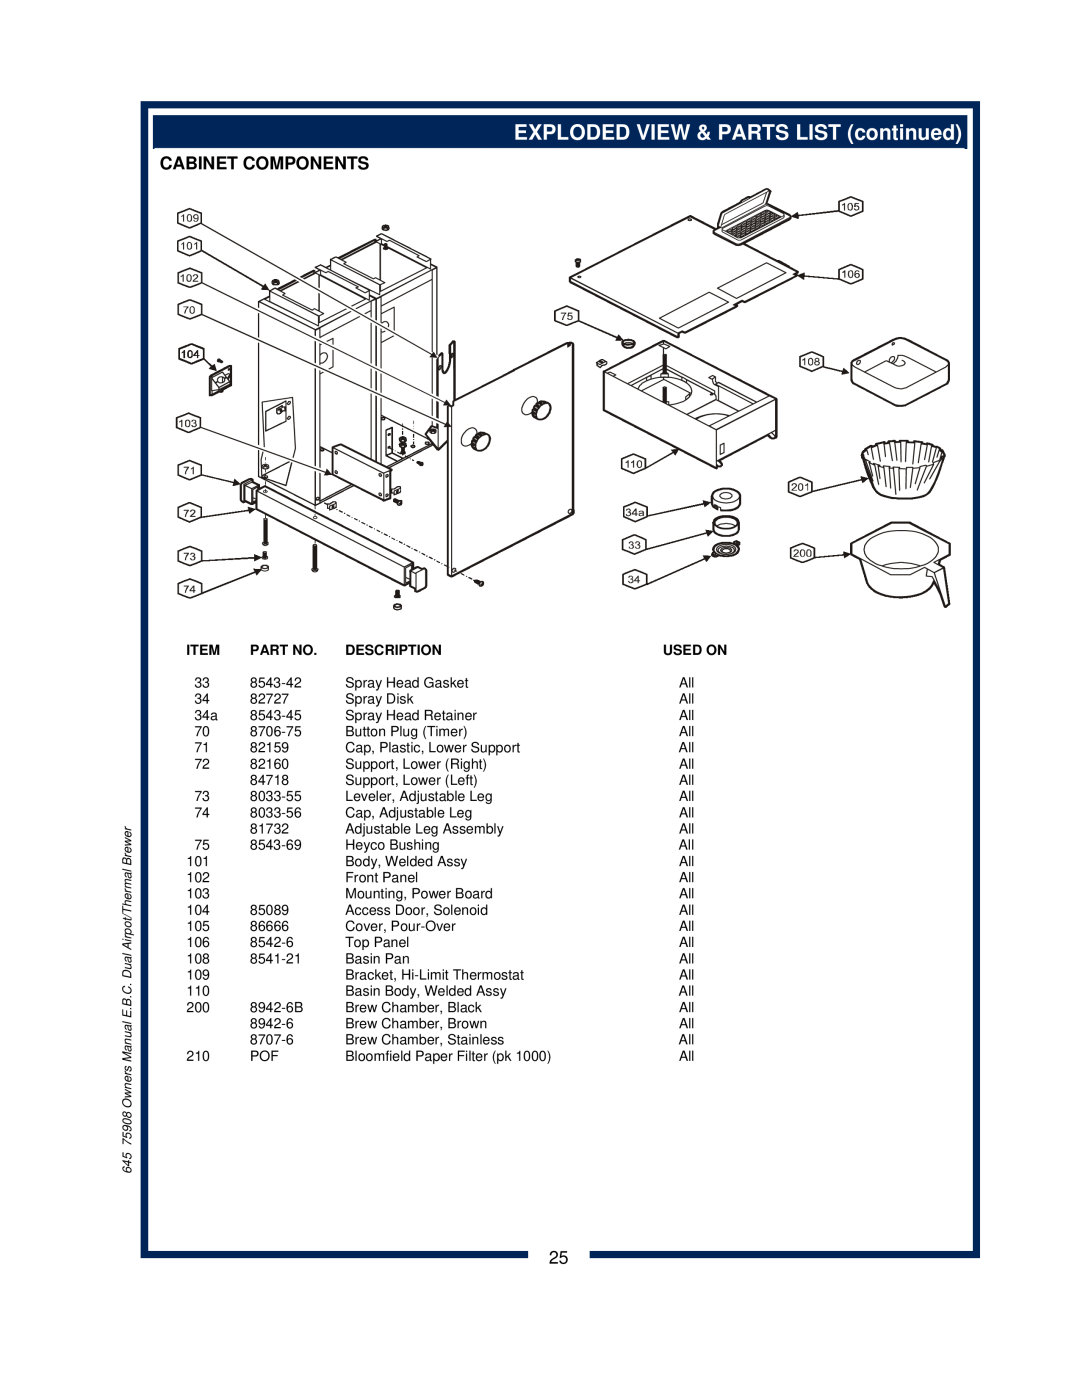 Bloomfield 1093, 1091, 1092, 1090 EXPLODED VIEW & PARTS LIST continued, Cabinet Components, Part No, Description, Used On 